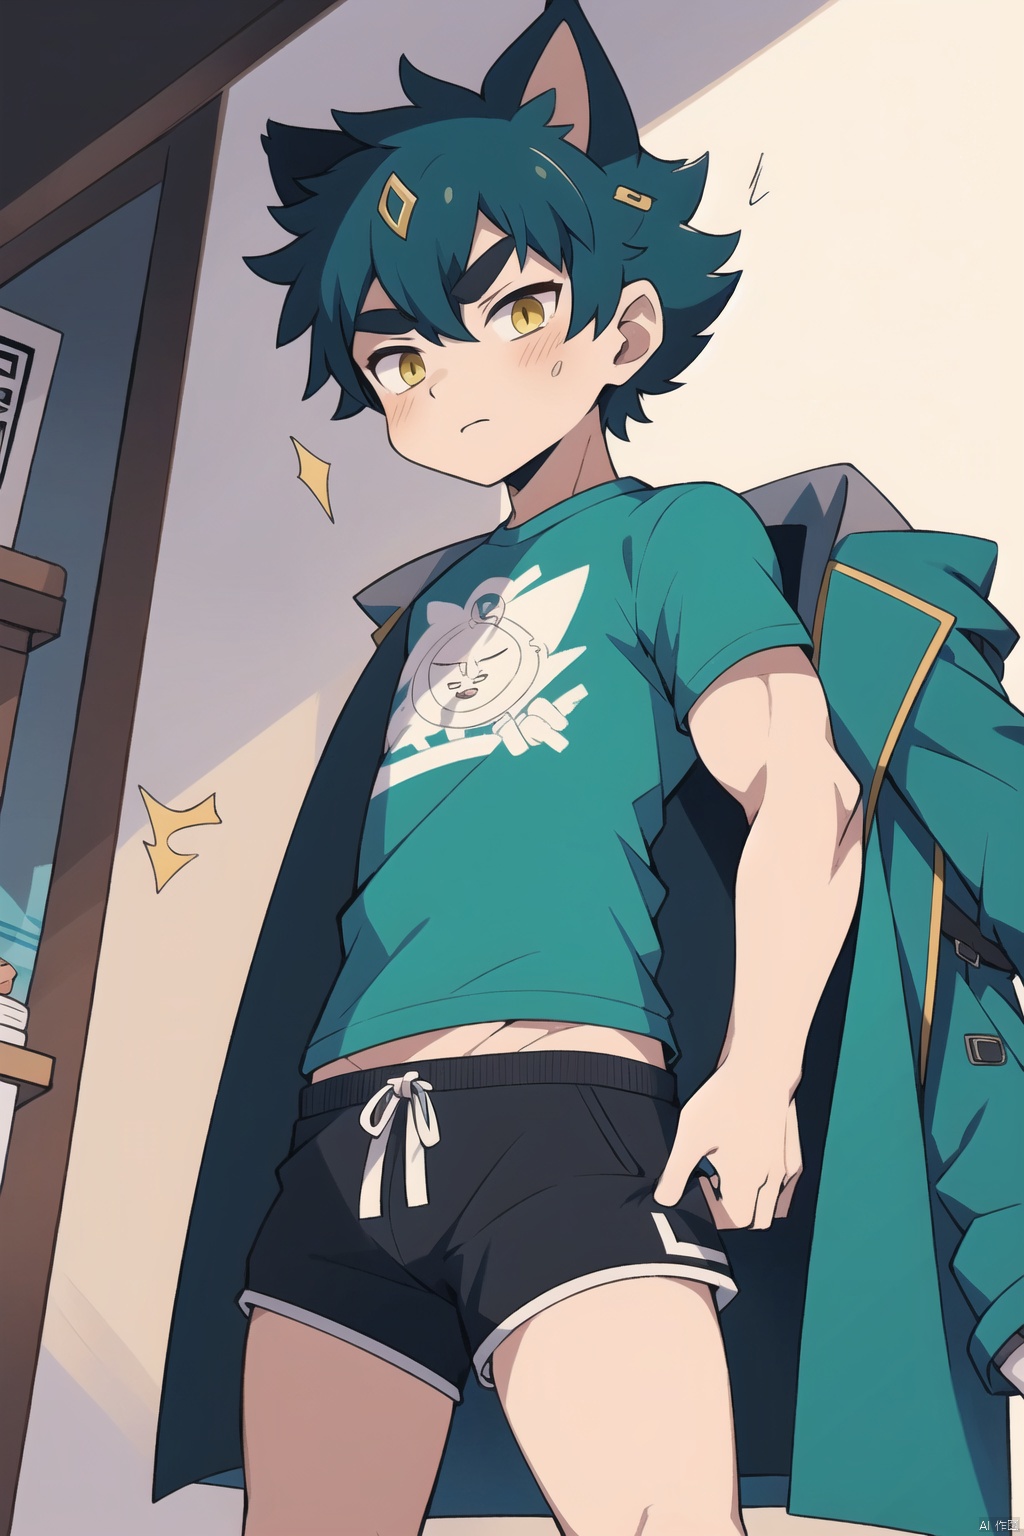  in this day and age,few things have aroused more cute than cat boy. to my way of thinking,it offers much food for flection. the catboy can be interpreted that the boy have muscle and Youth anvitality.T-shirt, shorts, coat, Male focus, (\shen ming shao nv\), Masturbation,